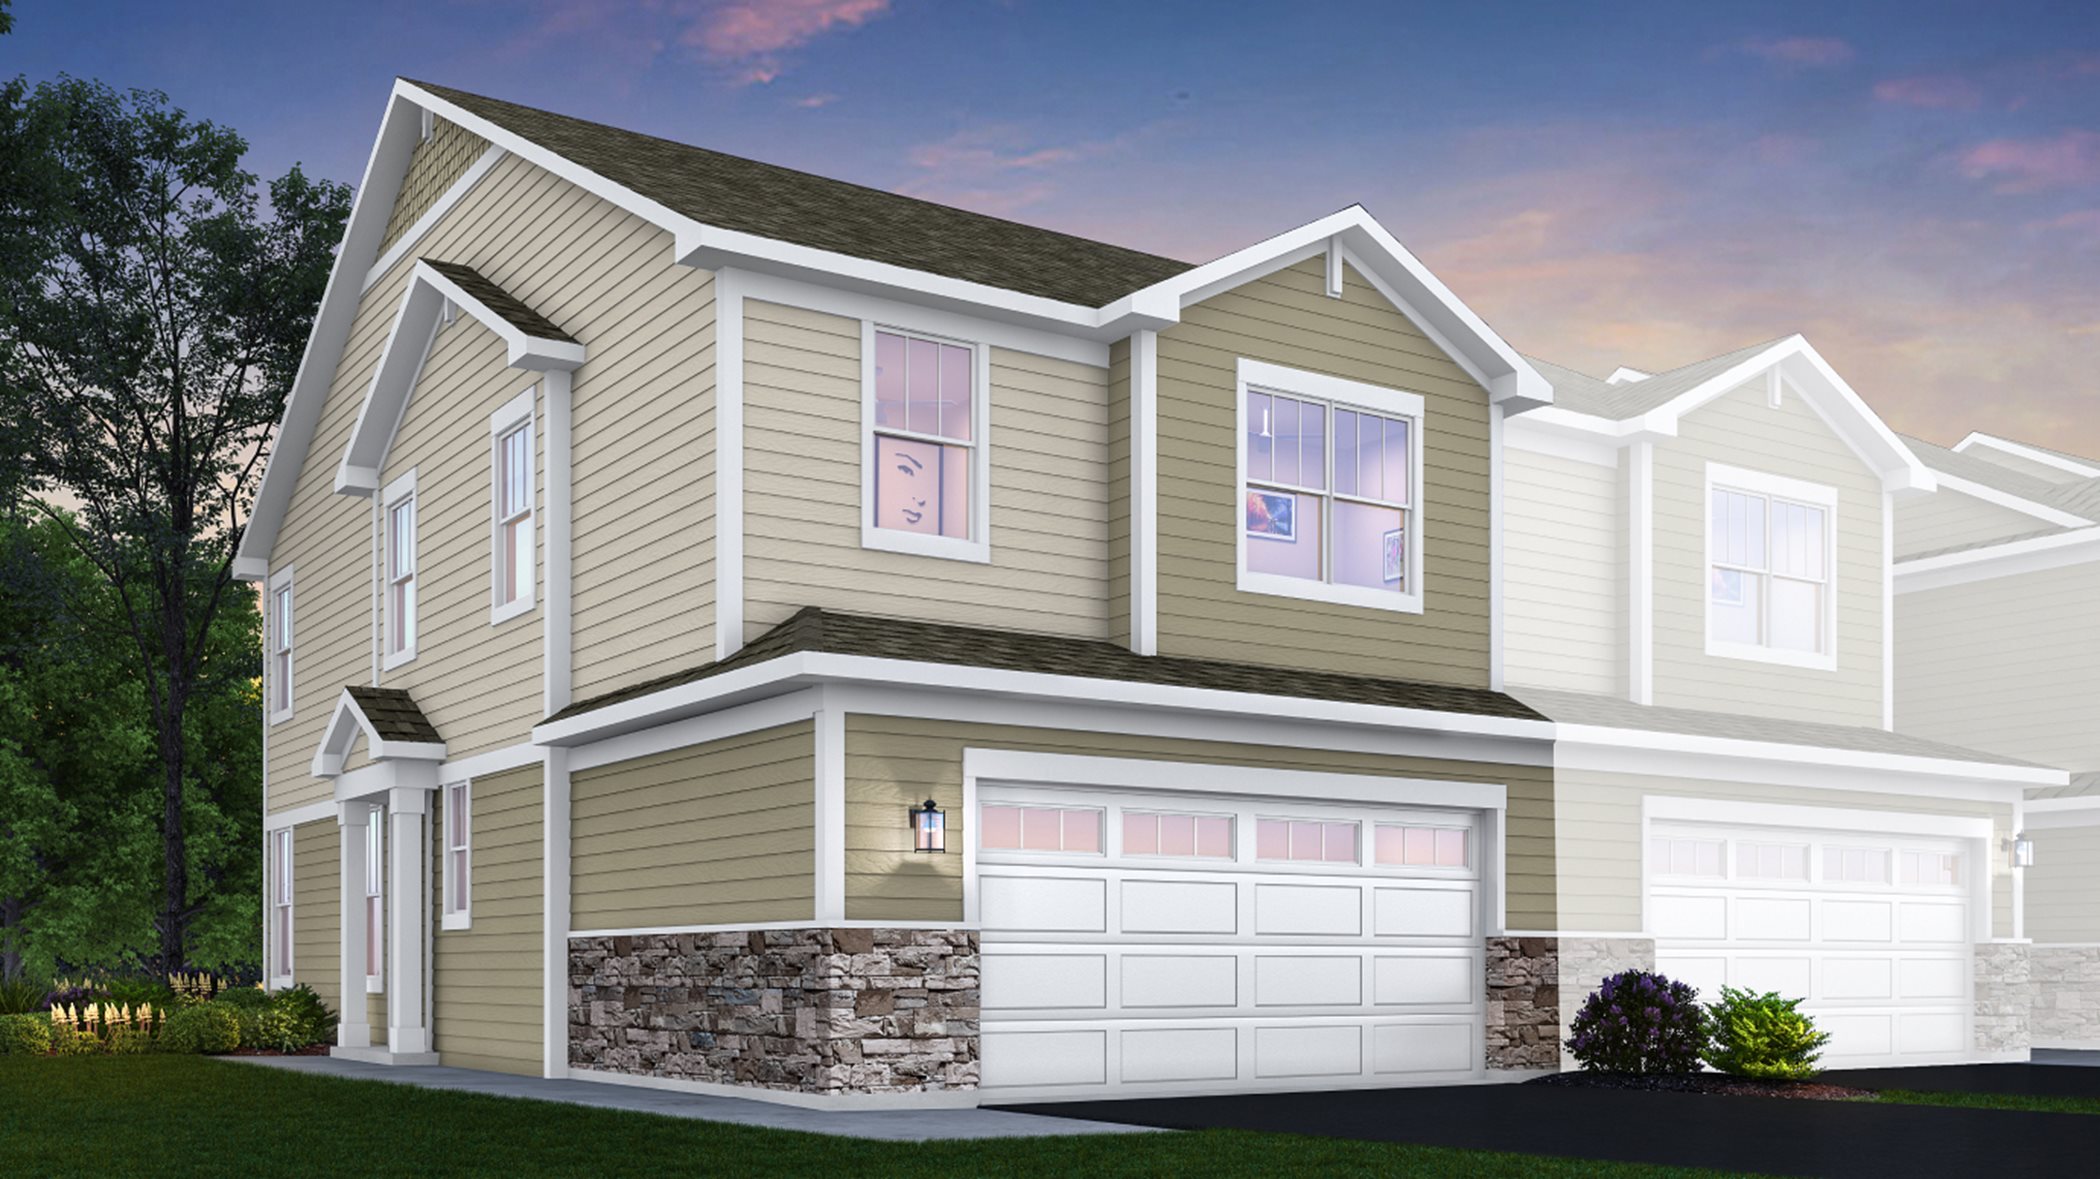 Crossings-of-Mundelein Traditional Townhomes Darcy ei A